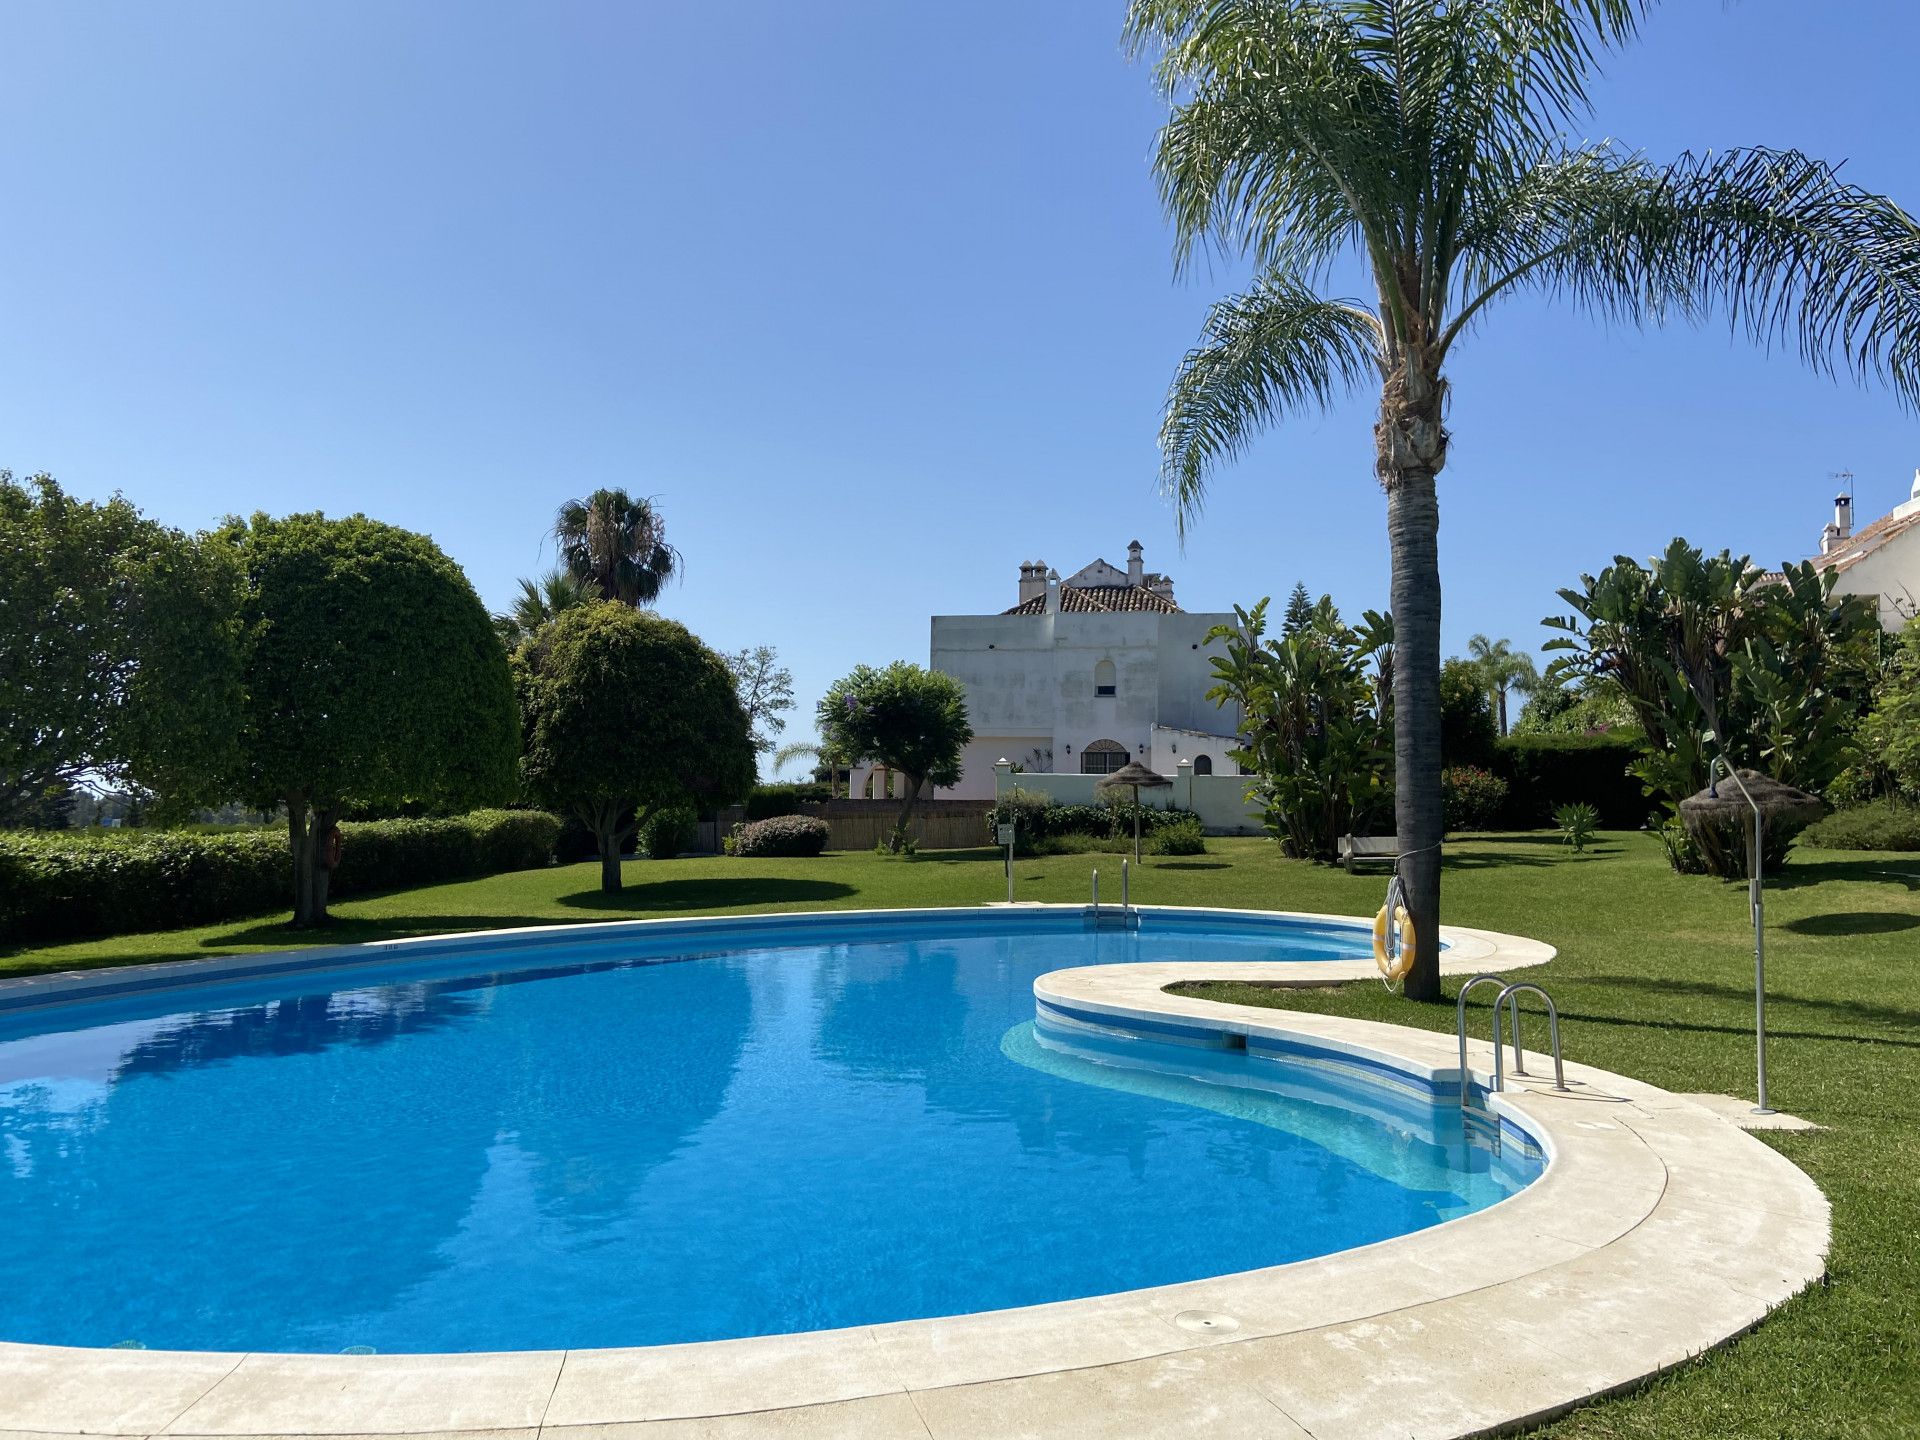 Lovely townhouse nestled in the established residential area of Monte Biarritz, on the border between Marbella and Estepona.